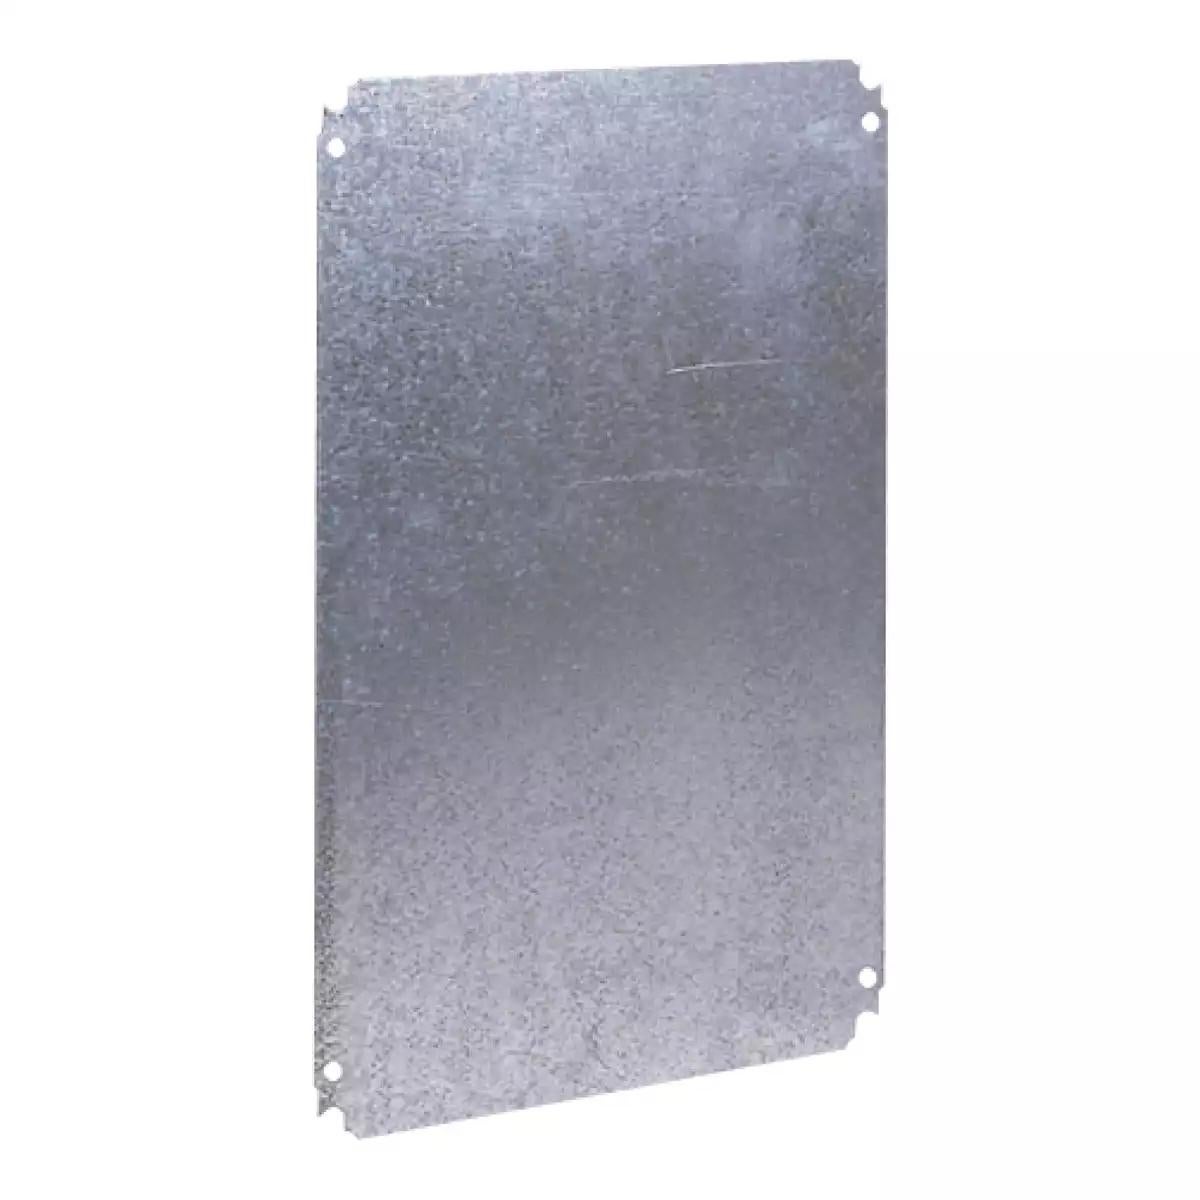 Schneider Electric Spacial CRN Plain mounting plate H300xW200mm made of galvanised sheet steel